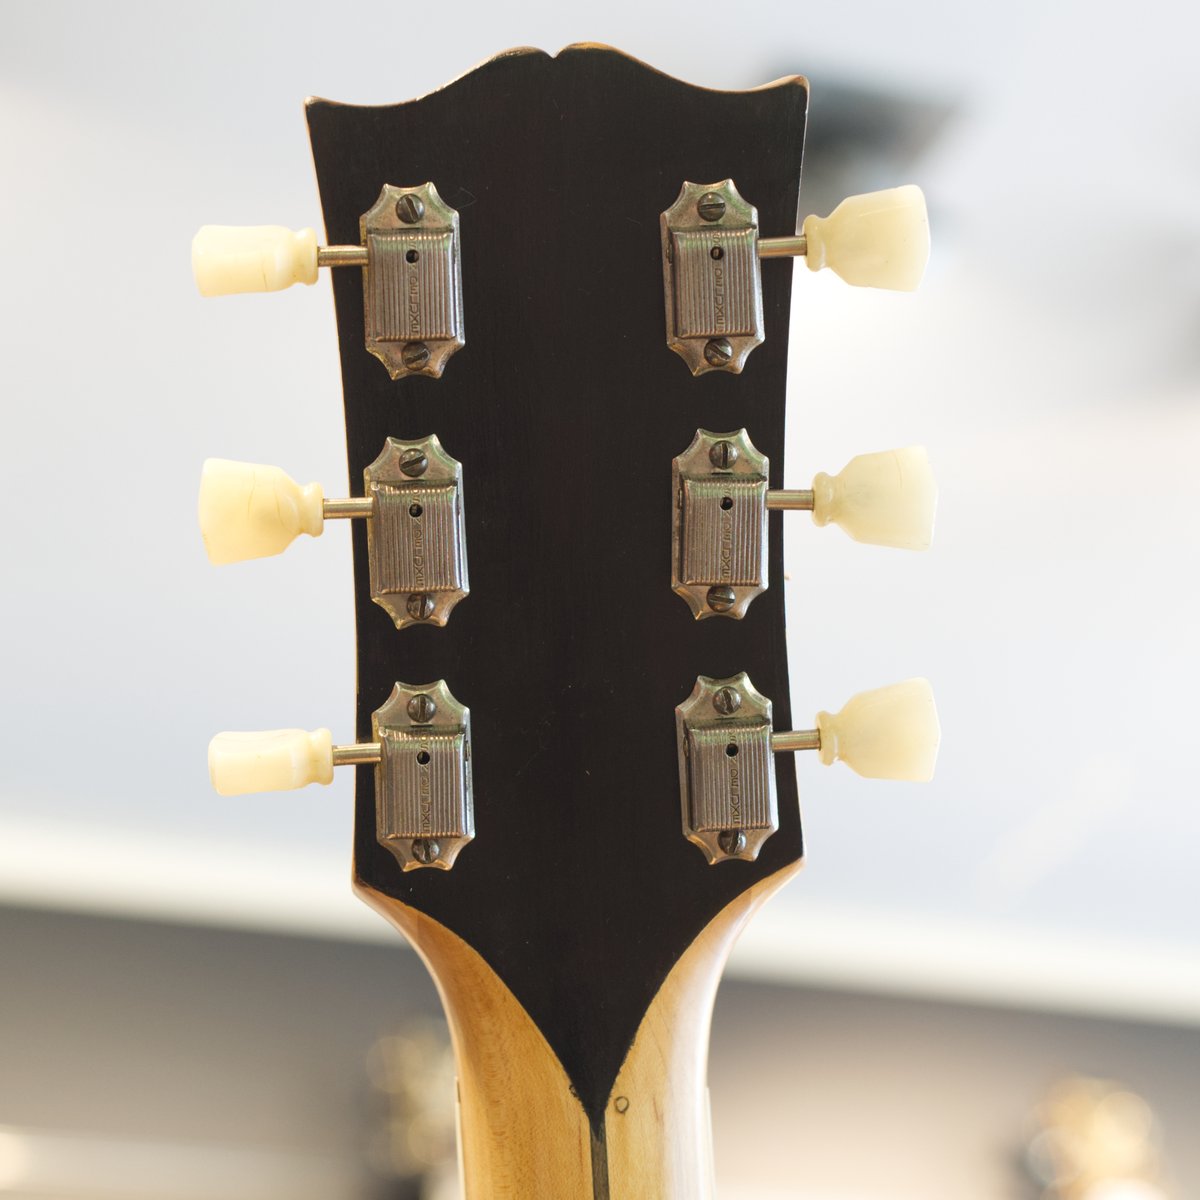 Ever played a Gibson from 1948 ?
No, not the reissue one … not the relic either …

More stories about this guitar soon …
#groovestreet98bxl #thebrusselsguitarshop #thebxlguitarshop #brusselsguitarshop #guitarshop #gibsonguitar #vintagegibsonacoustic #gibsonl7